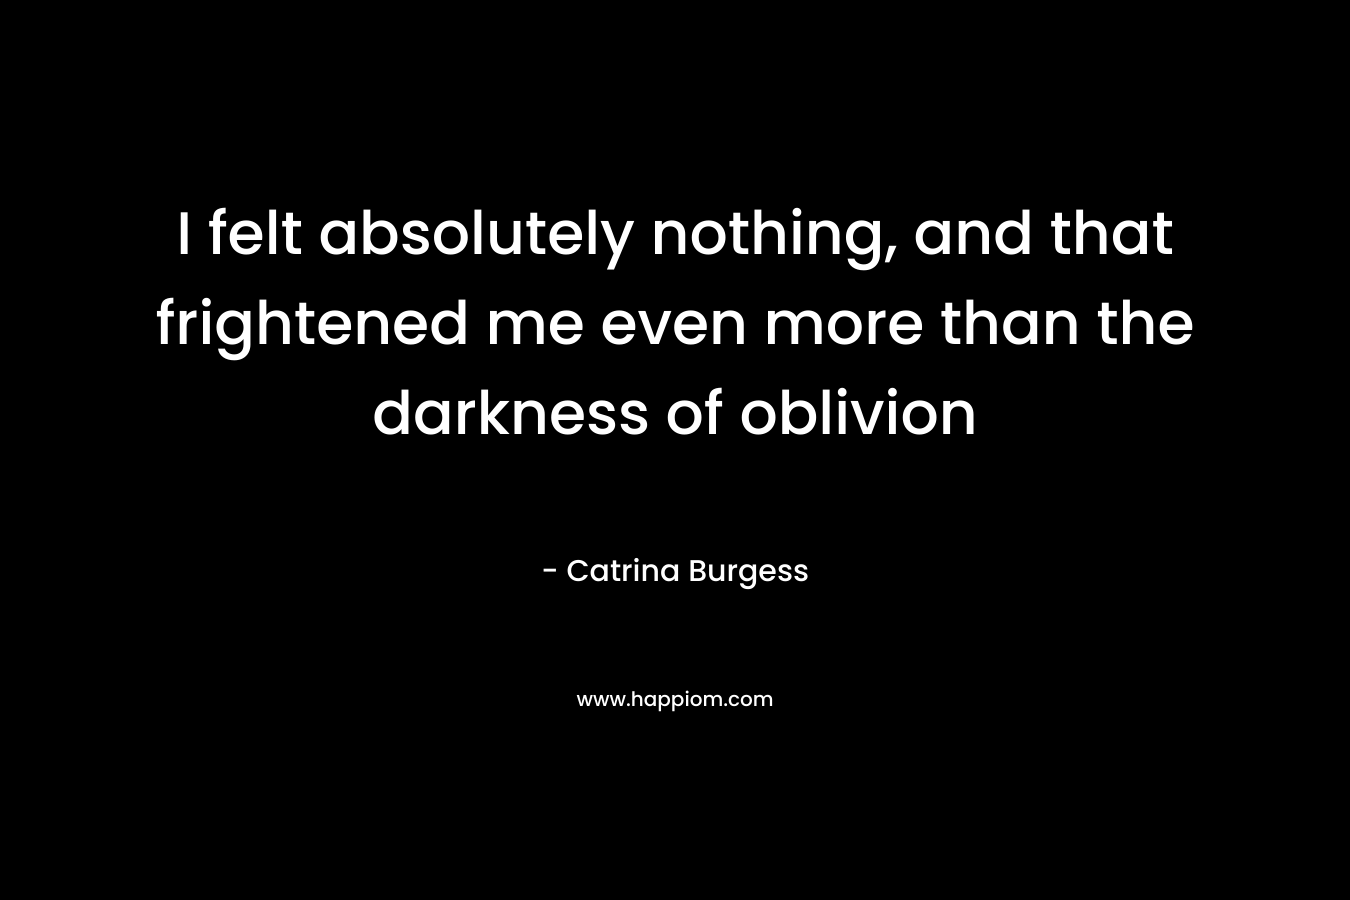 I felt absolutely nothing, and that frightened me even more than the darkness of oblivion – Catrina Burgess